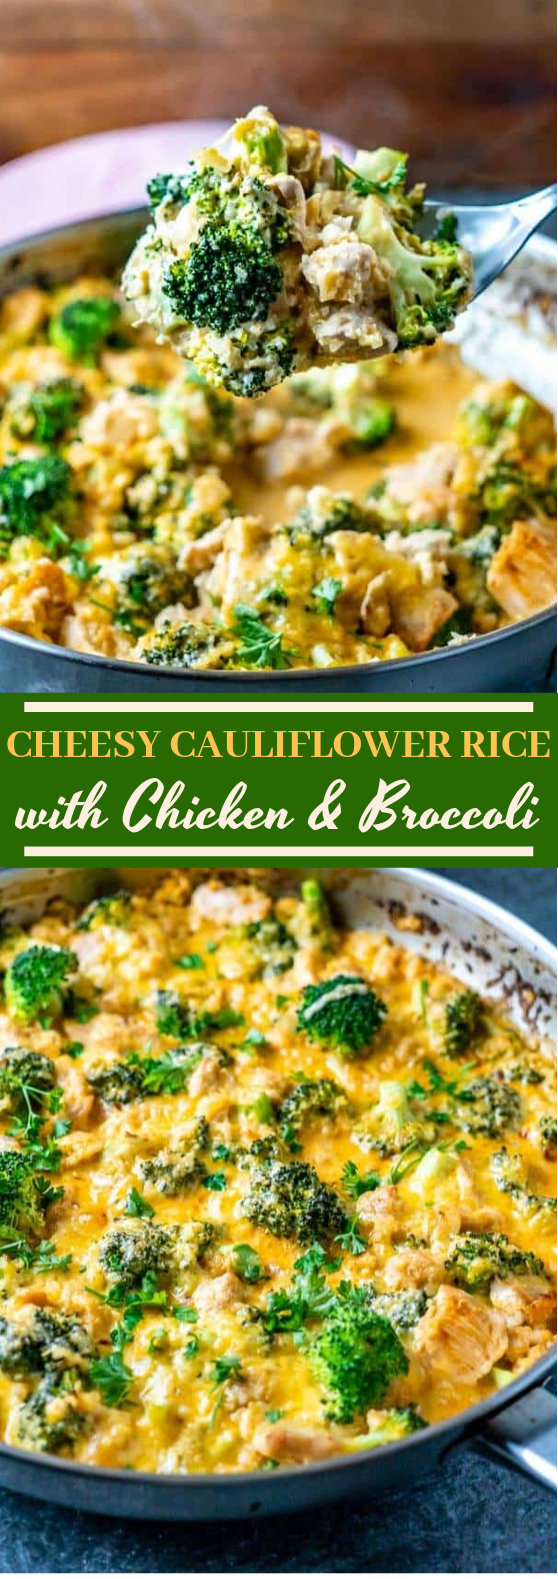 One Pan Cheesy Cauliflower Rice with Broccoli and Chicken #healthy #lowcarb #dinner #keto #glutenfree